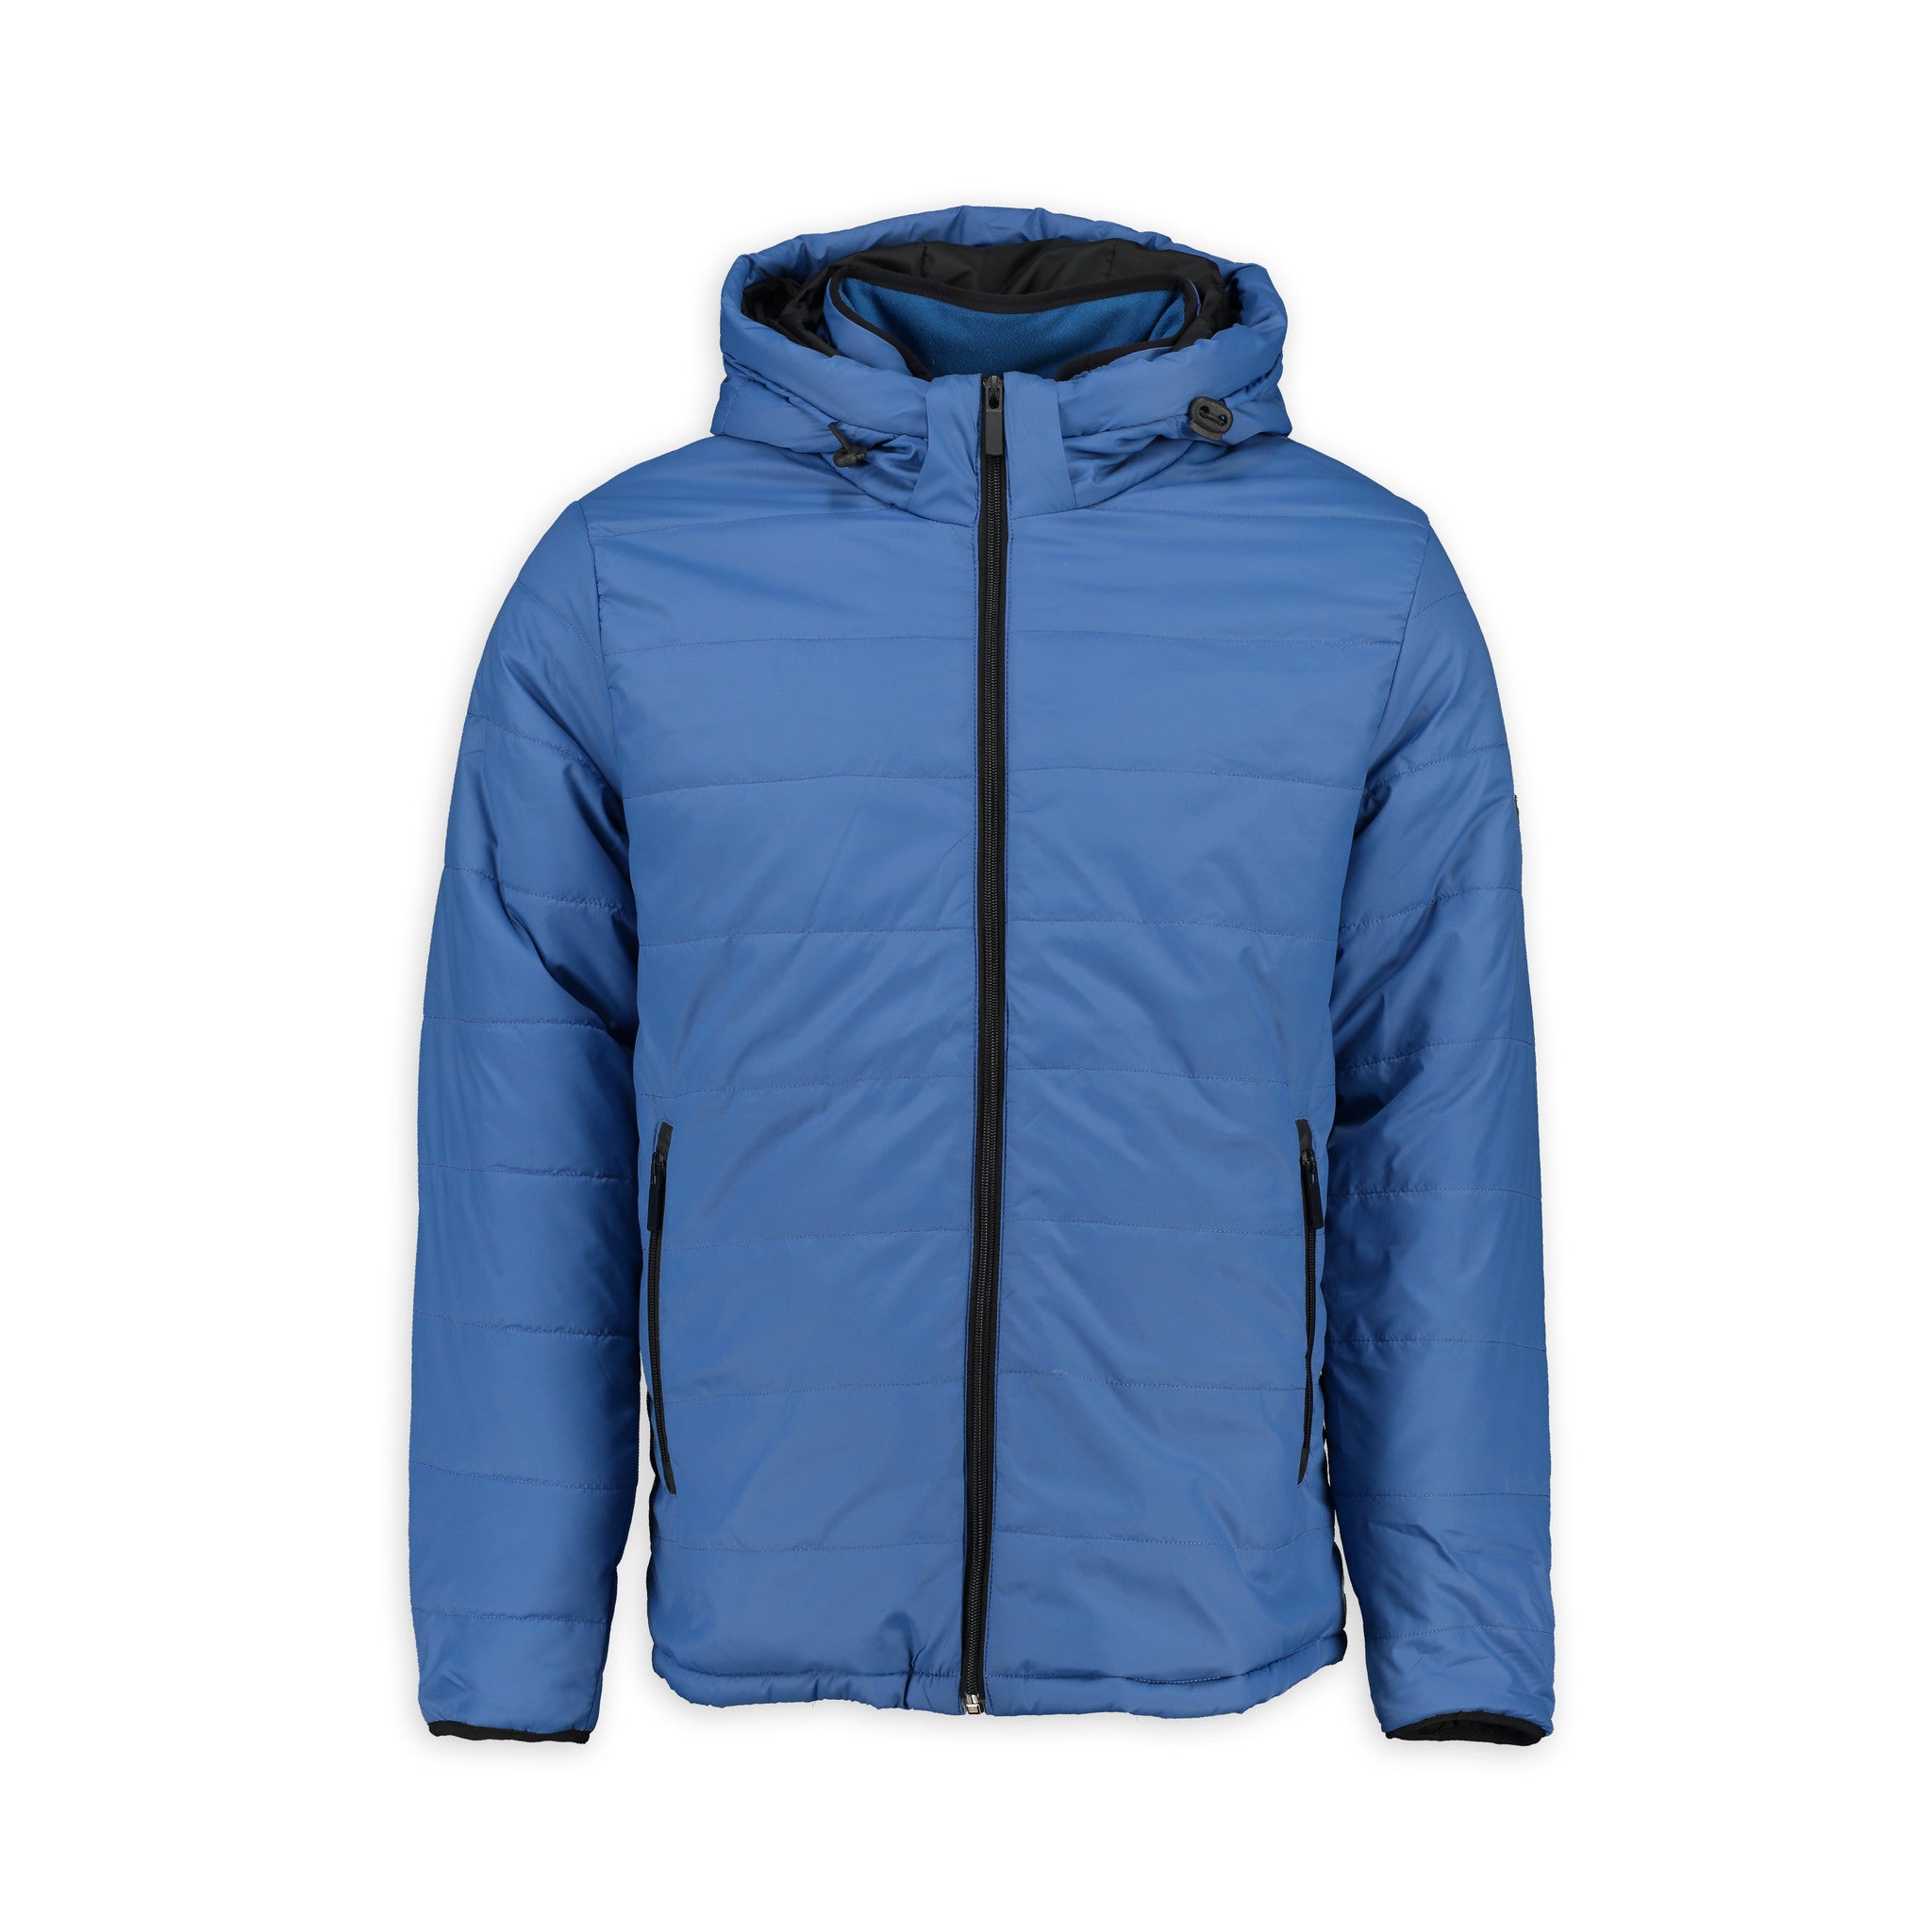 Aspact Expedition Jacket Blauw